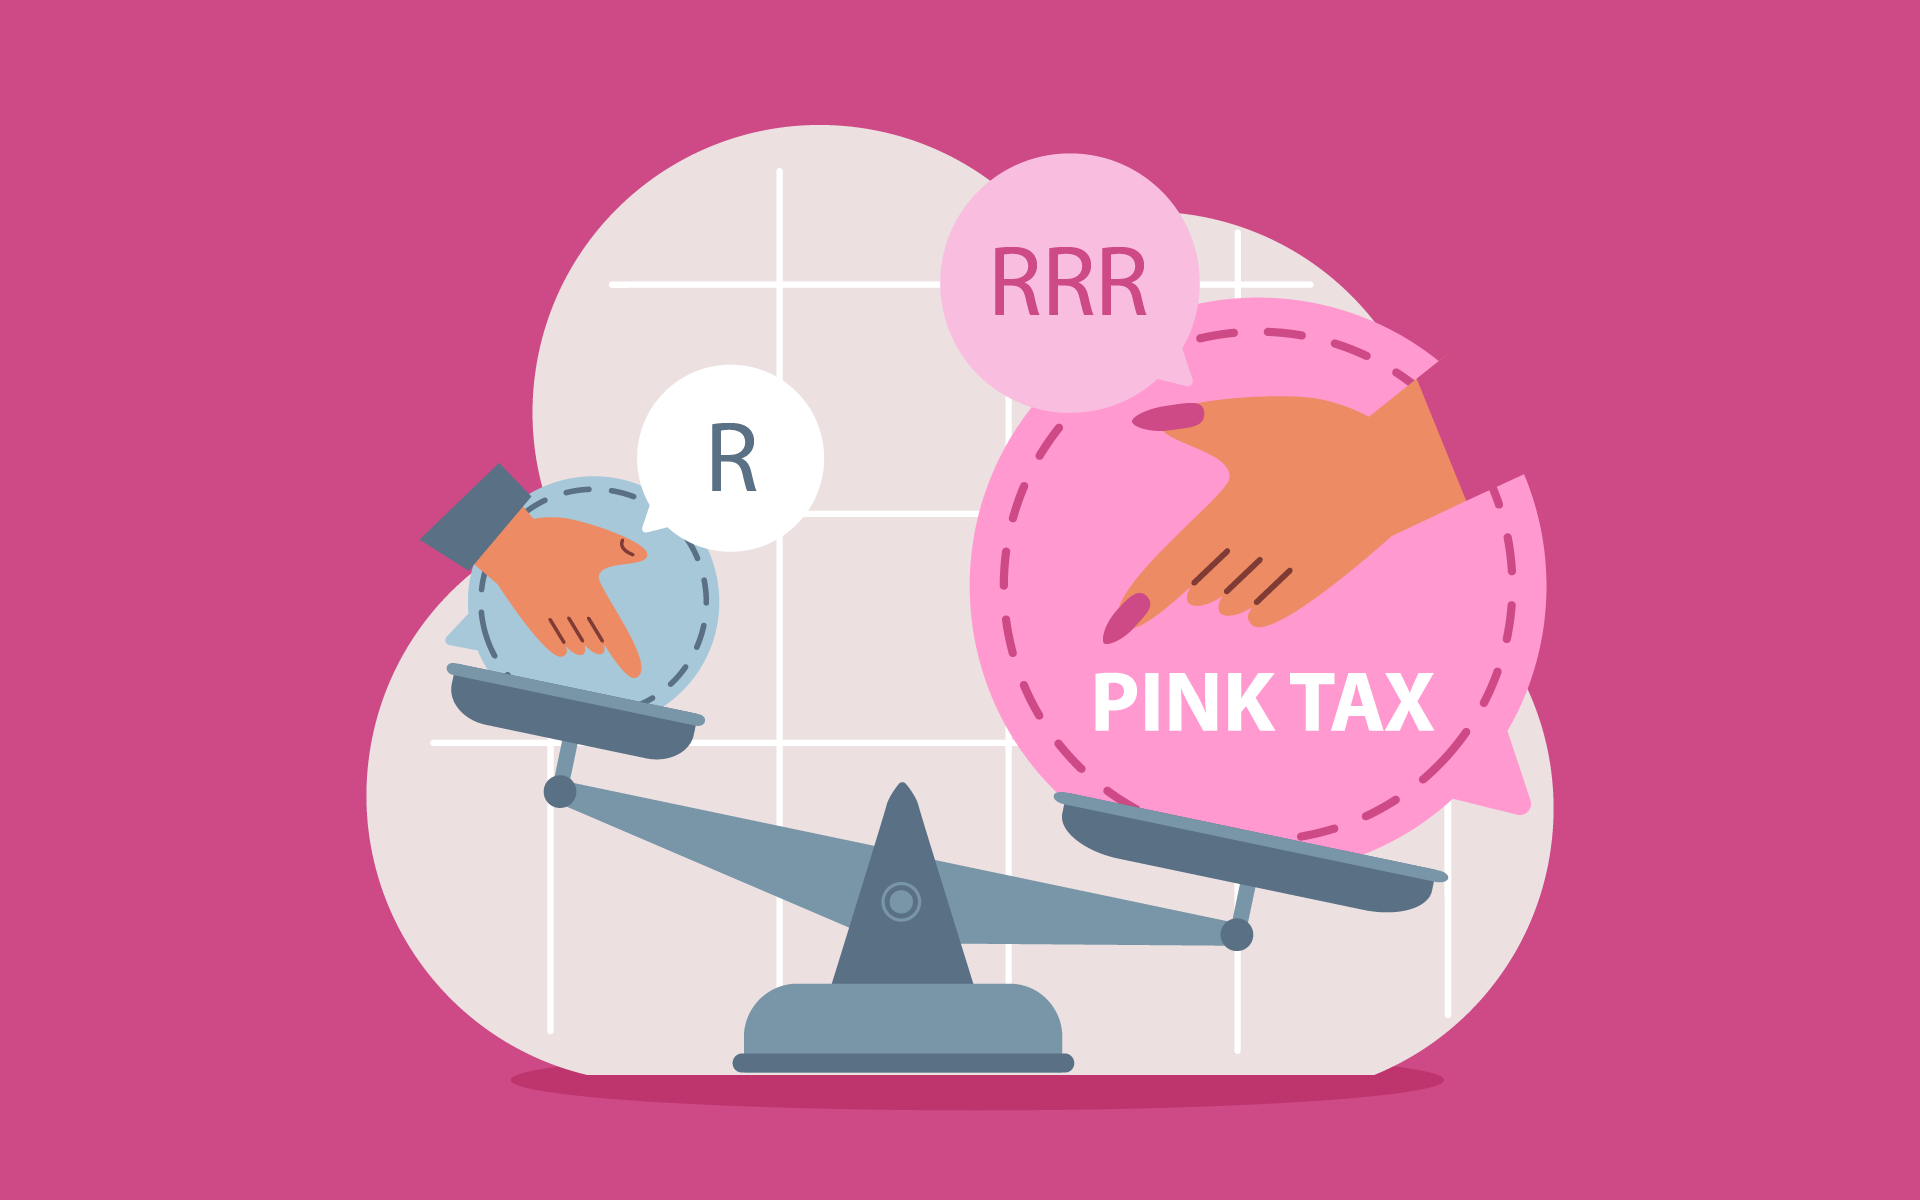 It’s time to smash Pink Tax and save the future for women